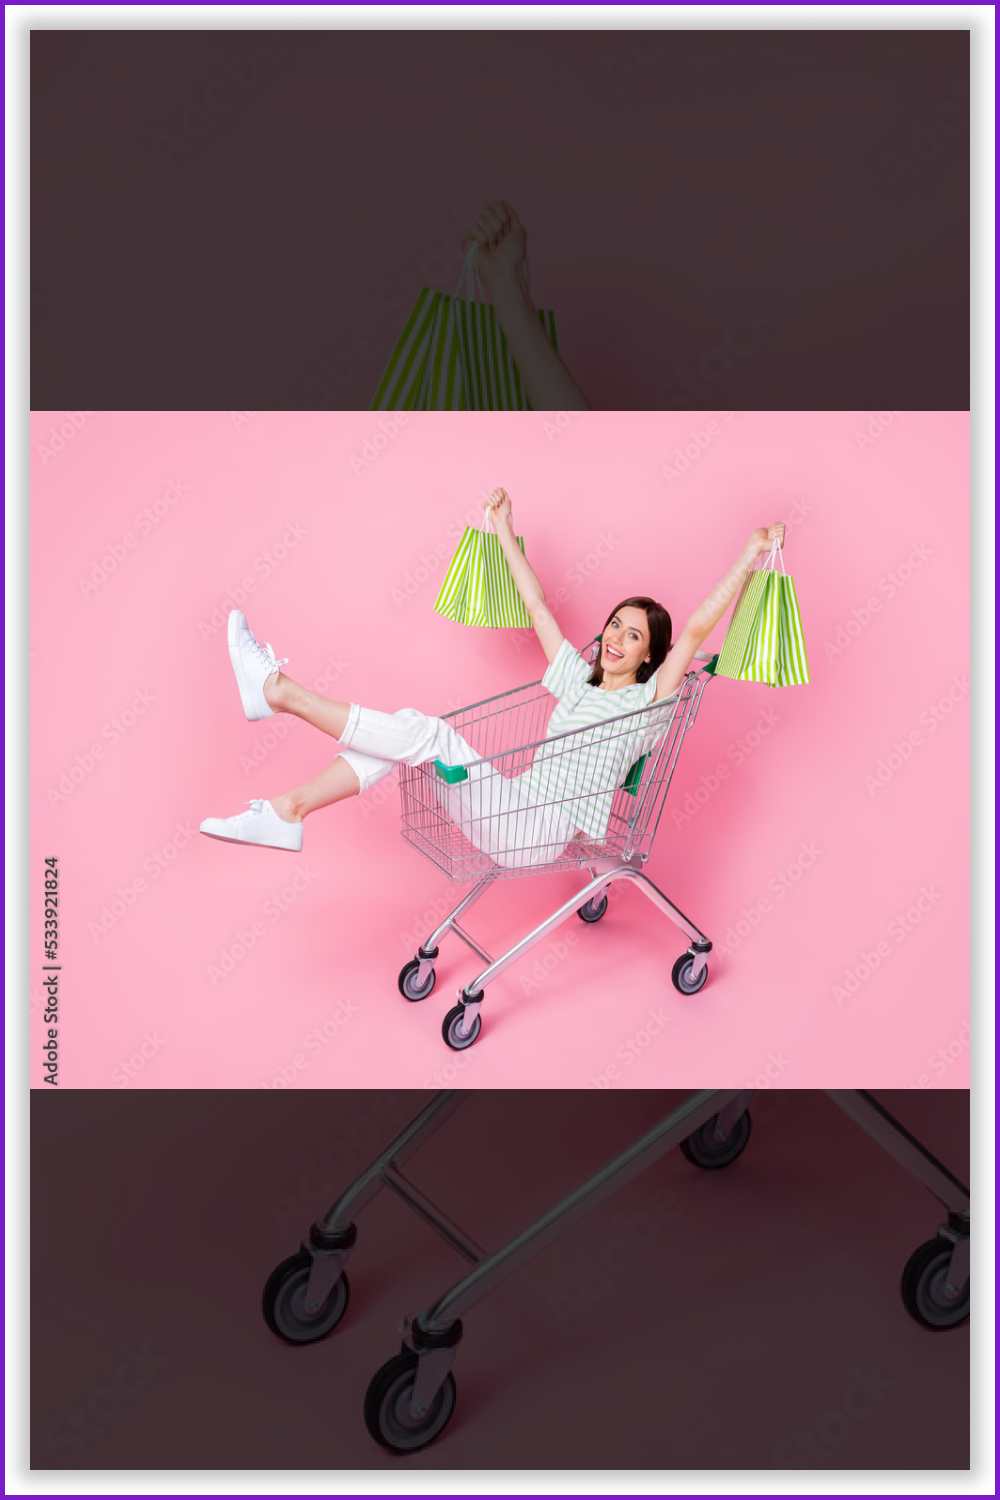 Happy woman with green paper bags in the shopping cart on the pink background.